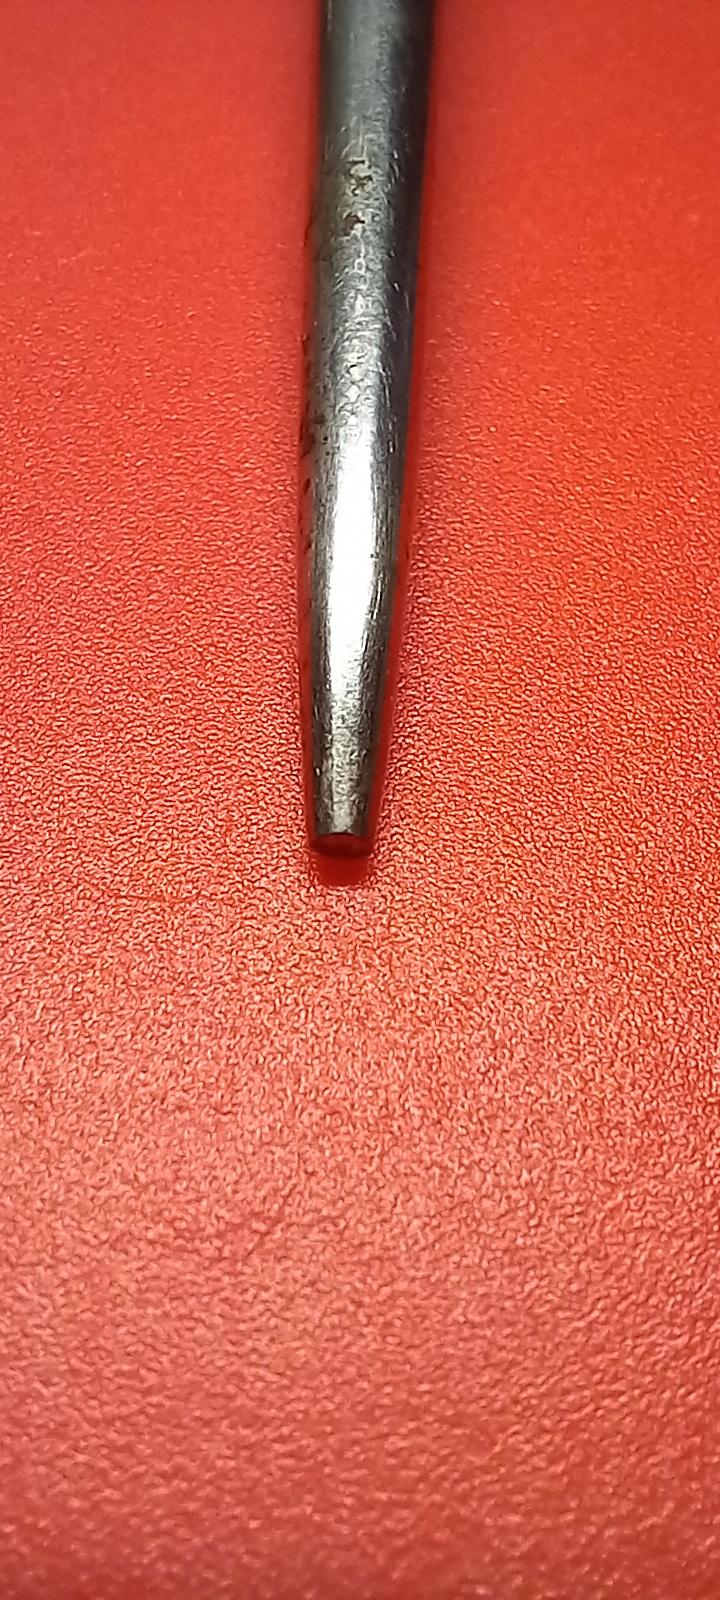 Types of graver - What is this tool? How do I use it? Tools ...